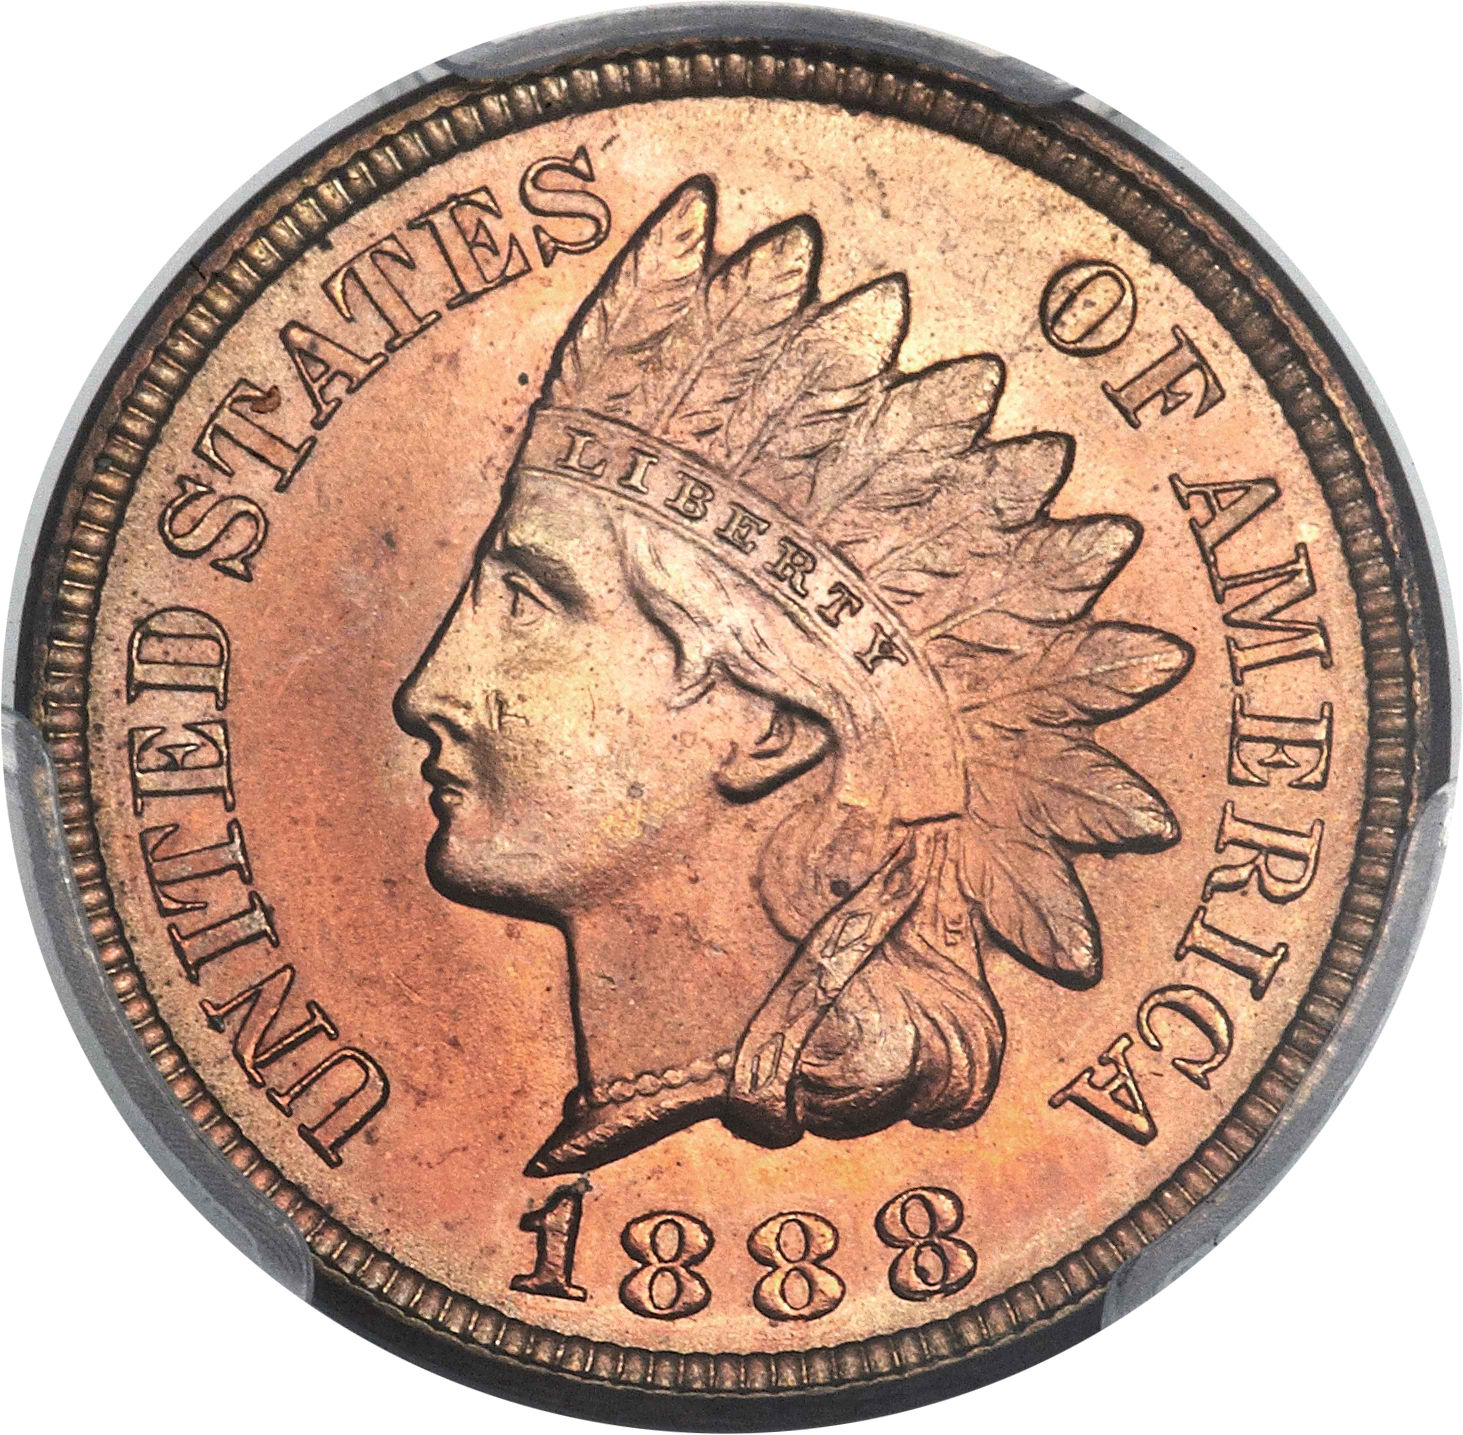 1888 RPD-003 Indian Head Penny - Photos courtesy of Heritage Auctions